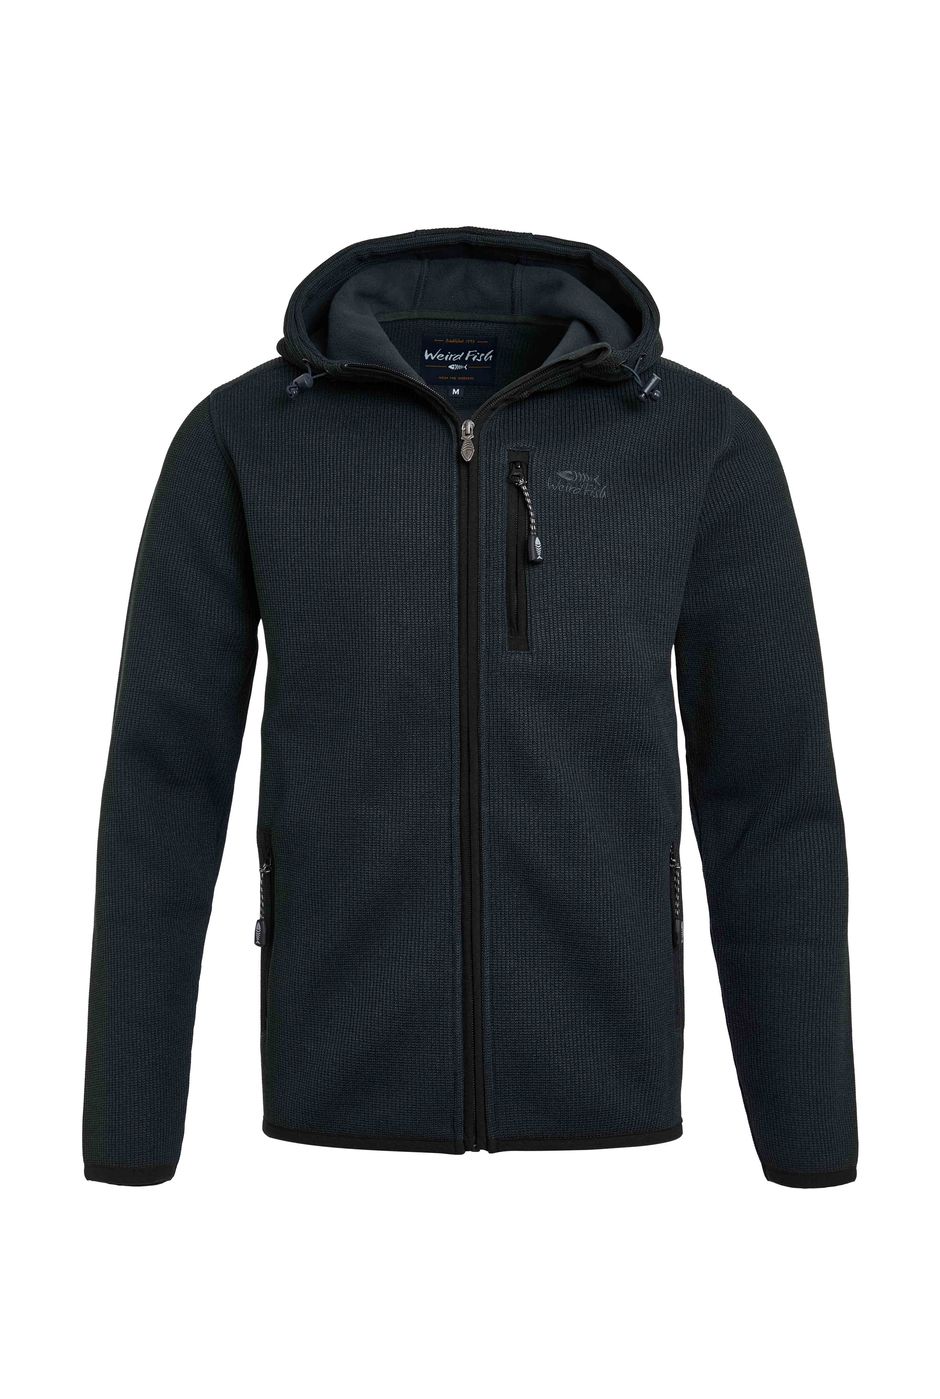 Lockie Recycled Full Zip Bonded Fleece Washed Black | Weird Fish